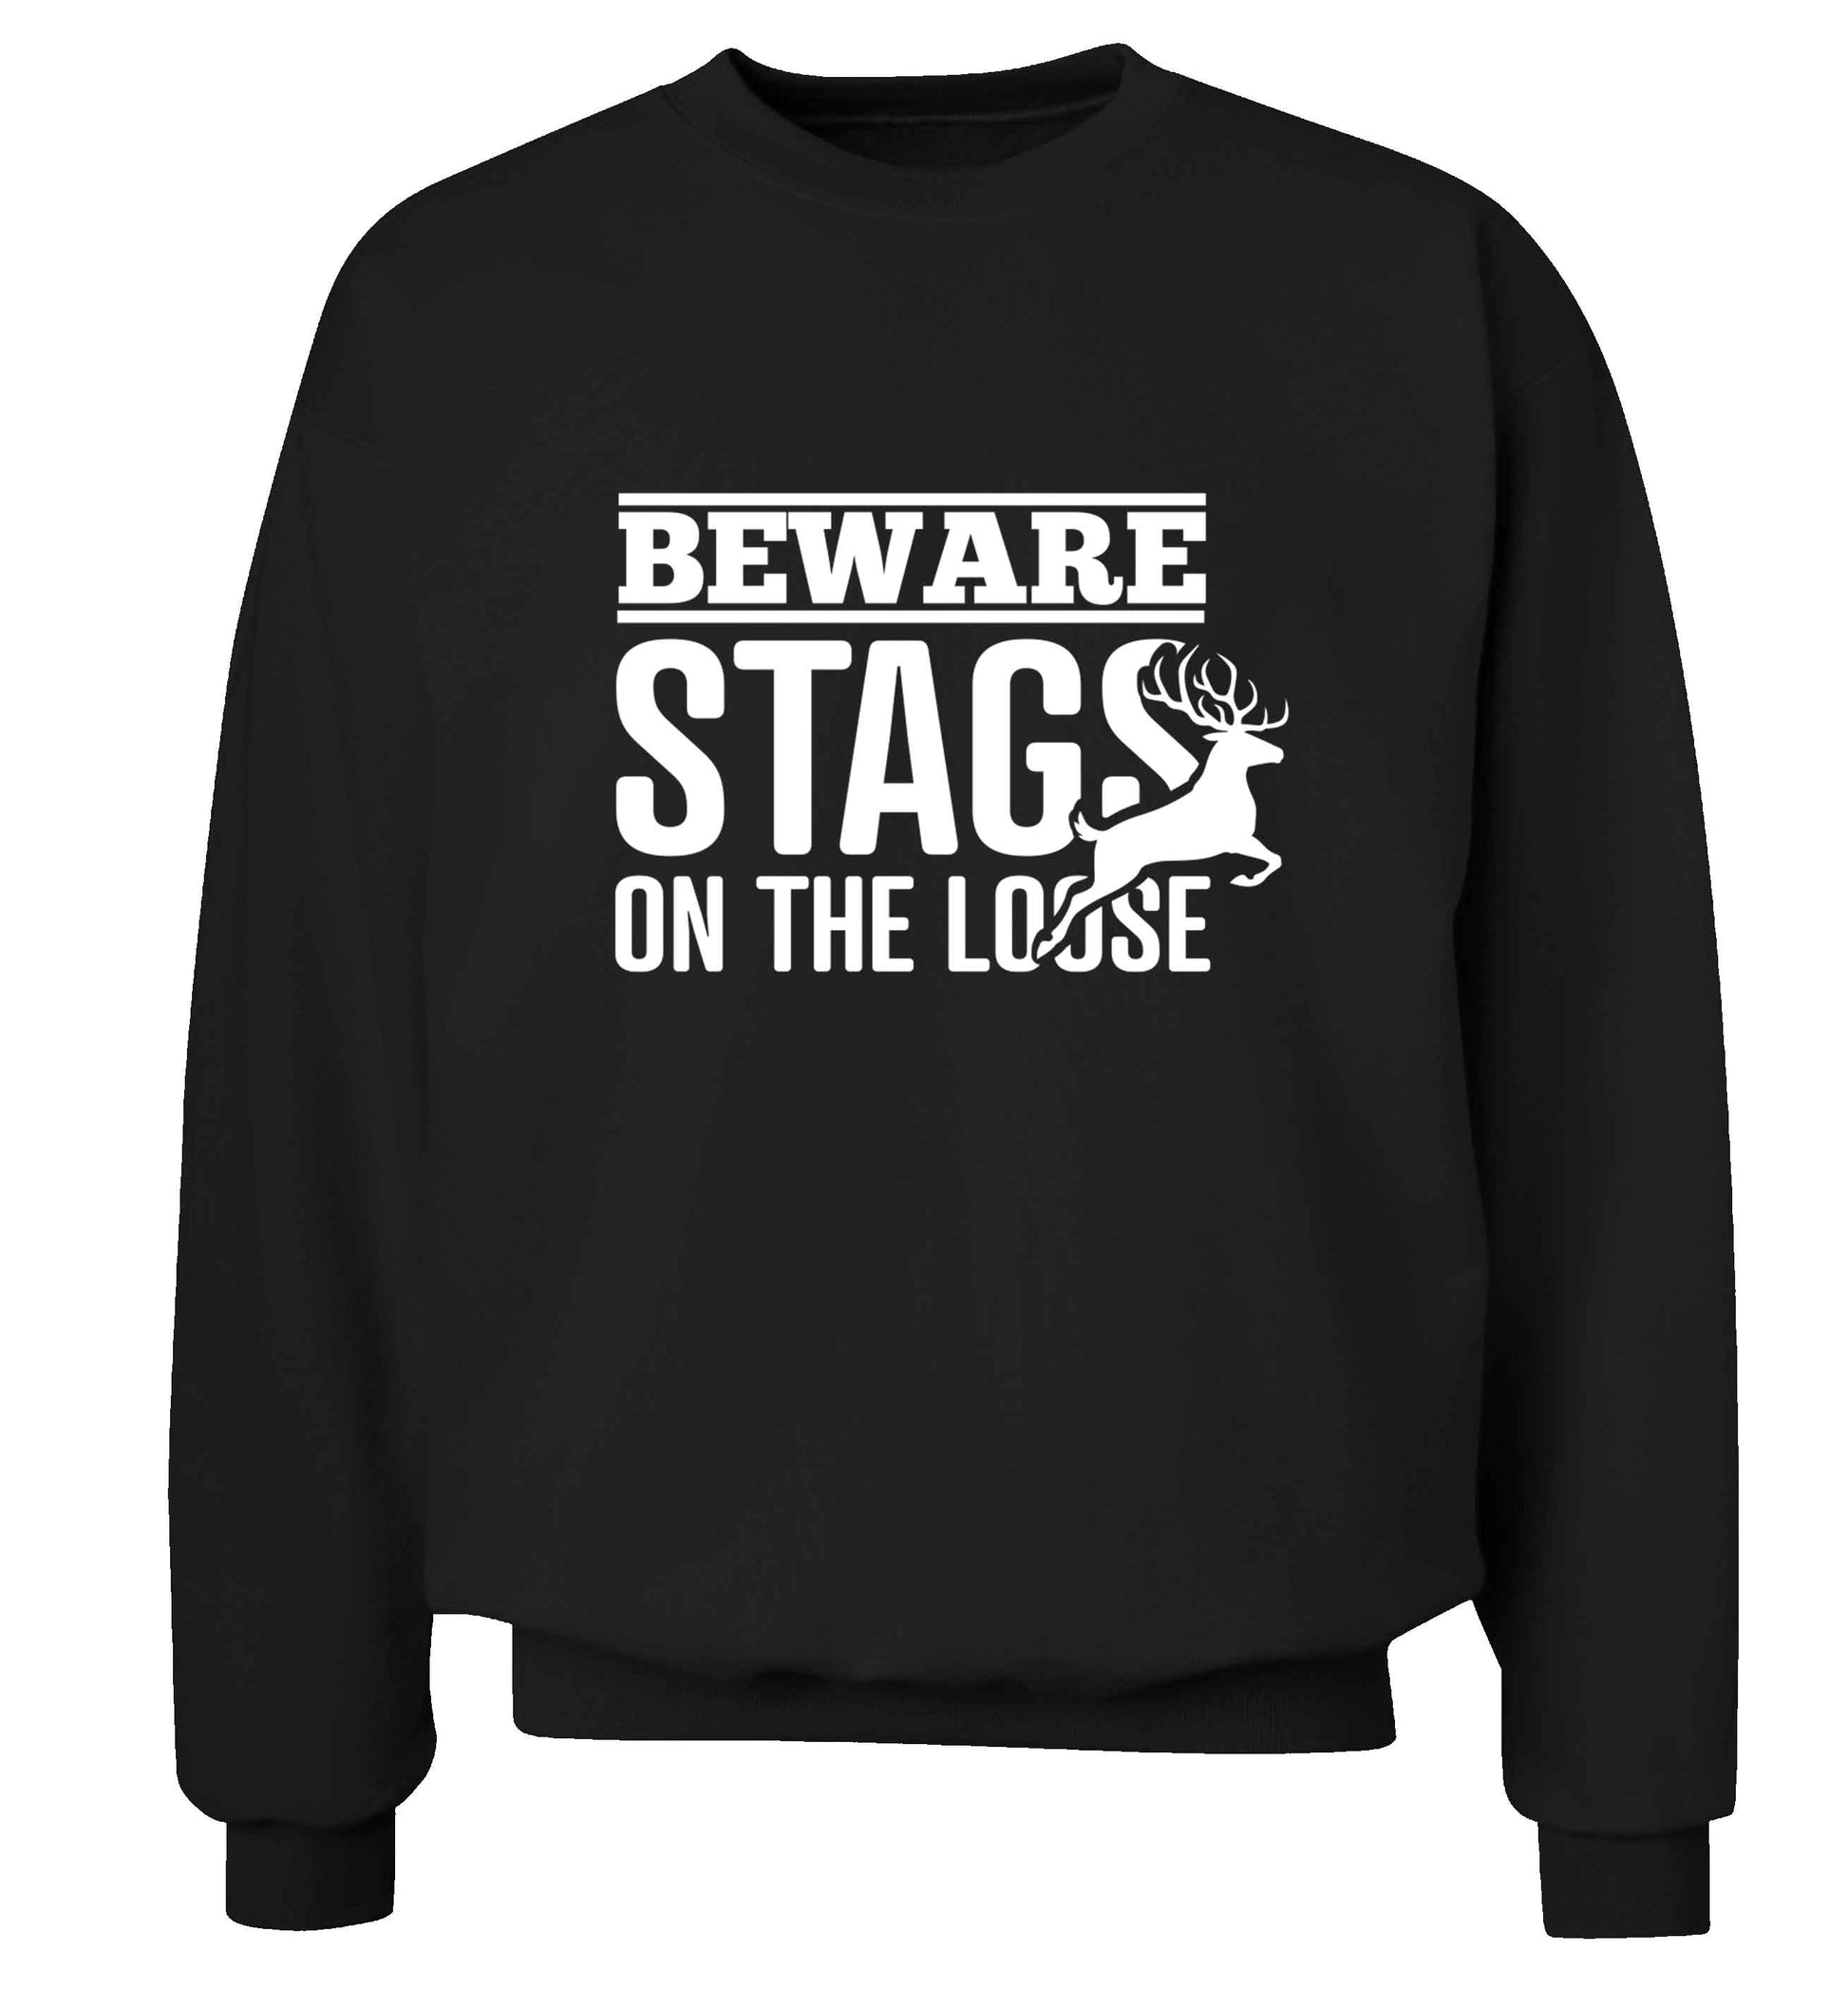 Beware stags on the loose adult's unisex black sweater 2XL